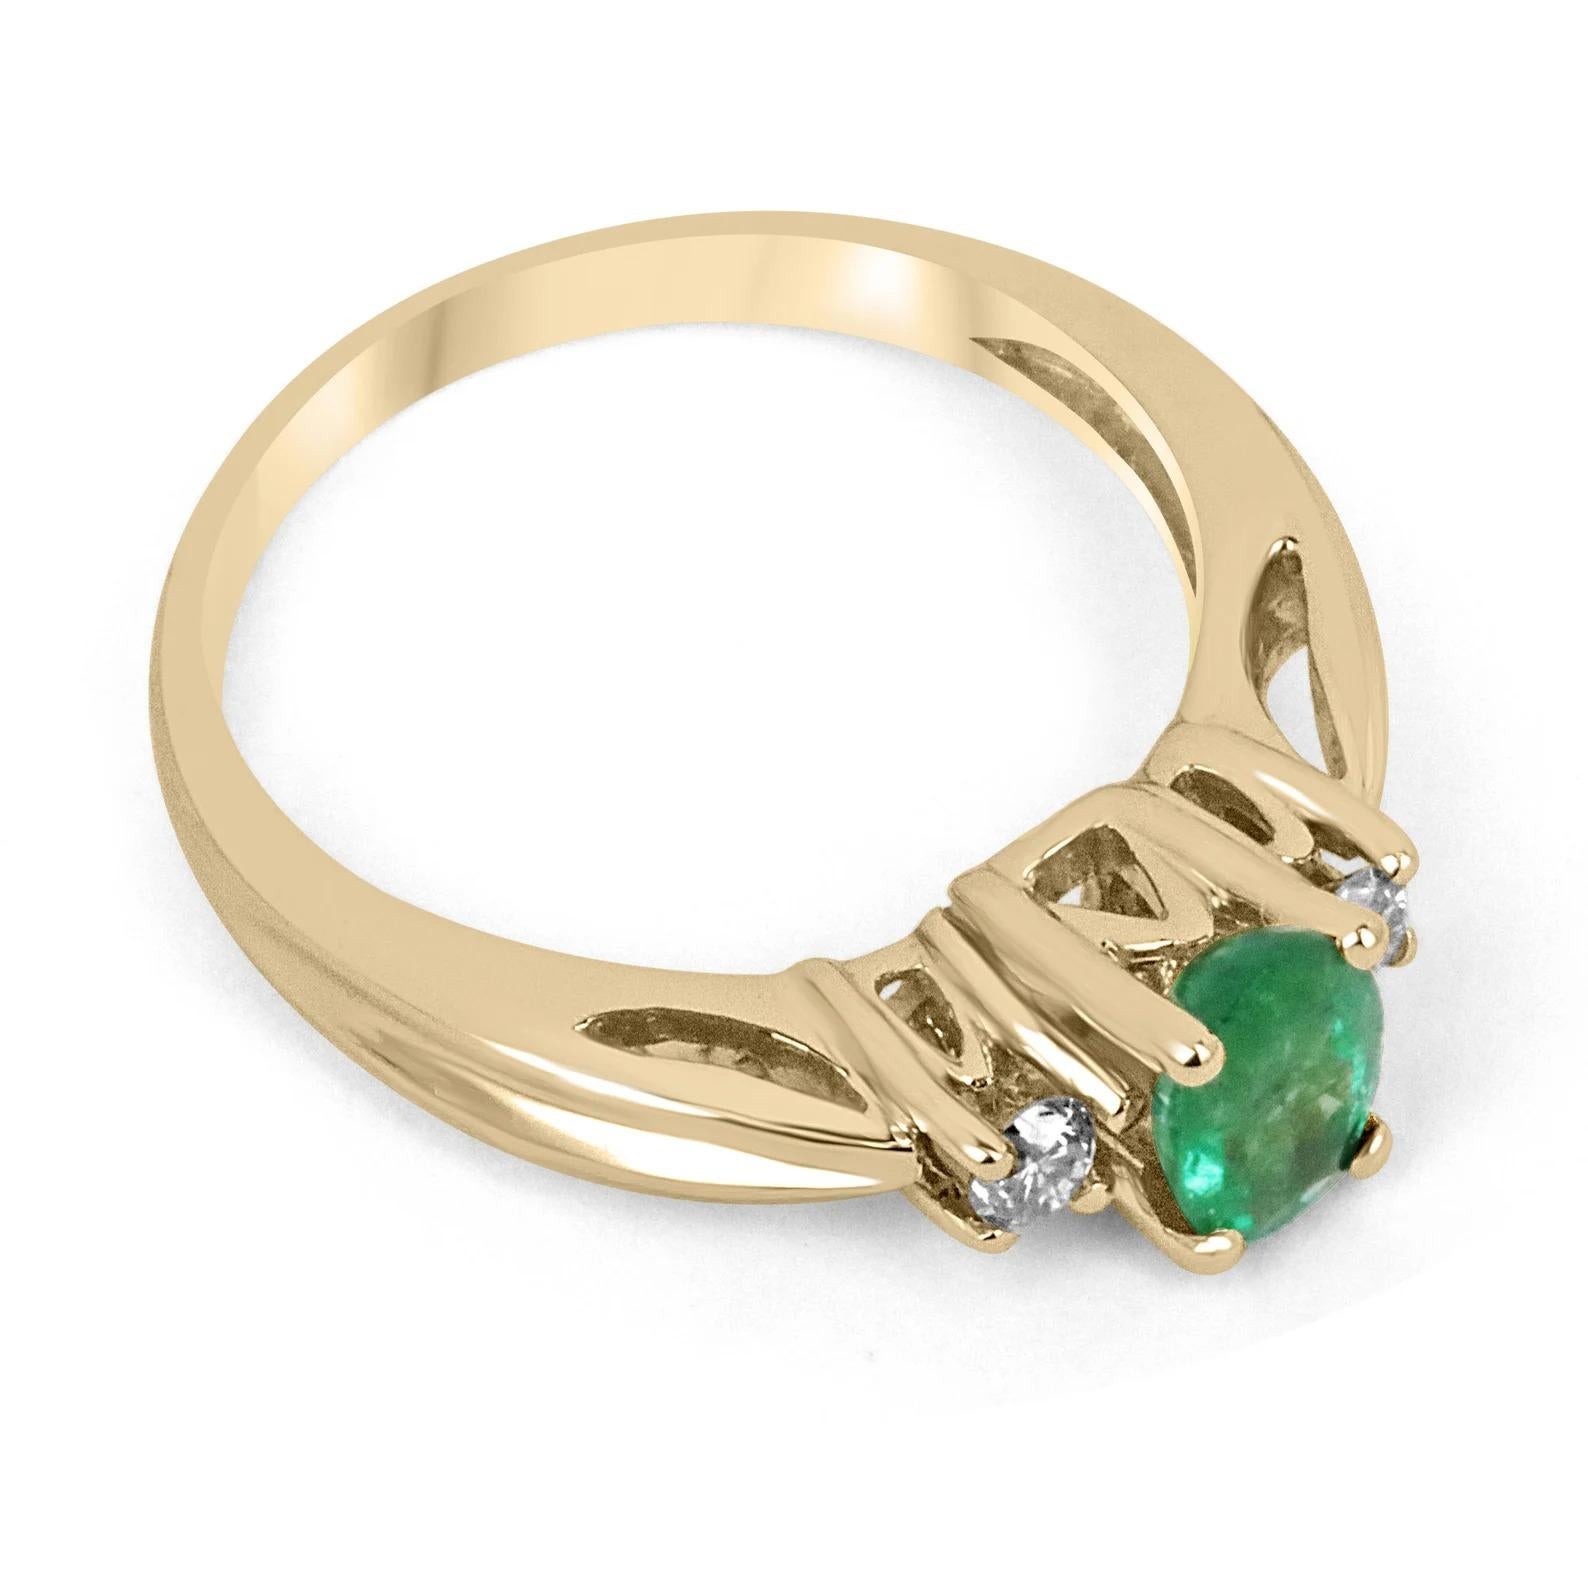 A classic emerald and diamond three-stone ring. Dexterously crafted in gleaming 14K gold this ring features a 1.17-carat natural emerald-oval cut from the origins of Zambia. Set in a secure prong setting, this extraordinary emerald has a medium dark